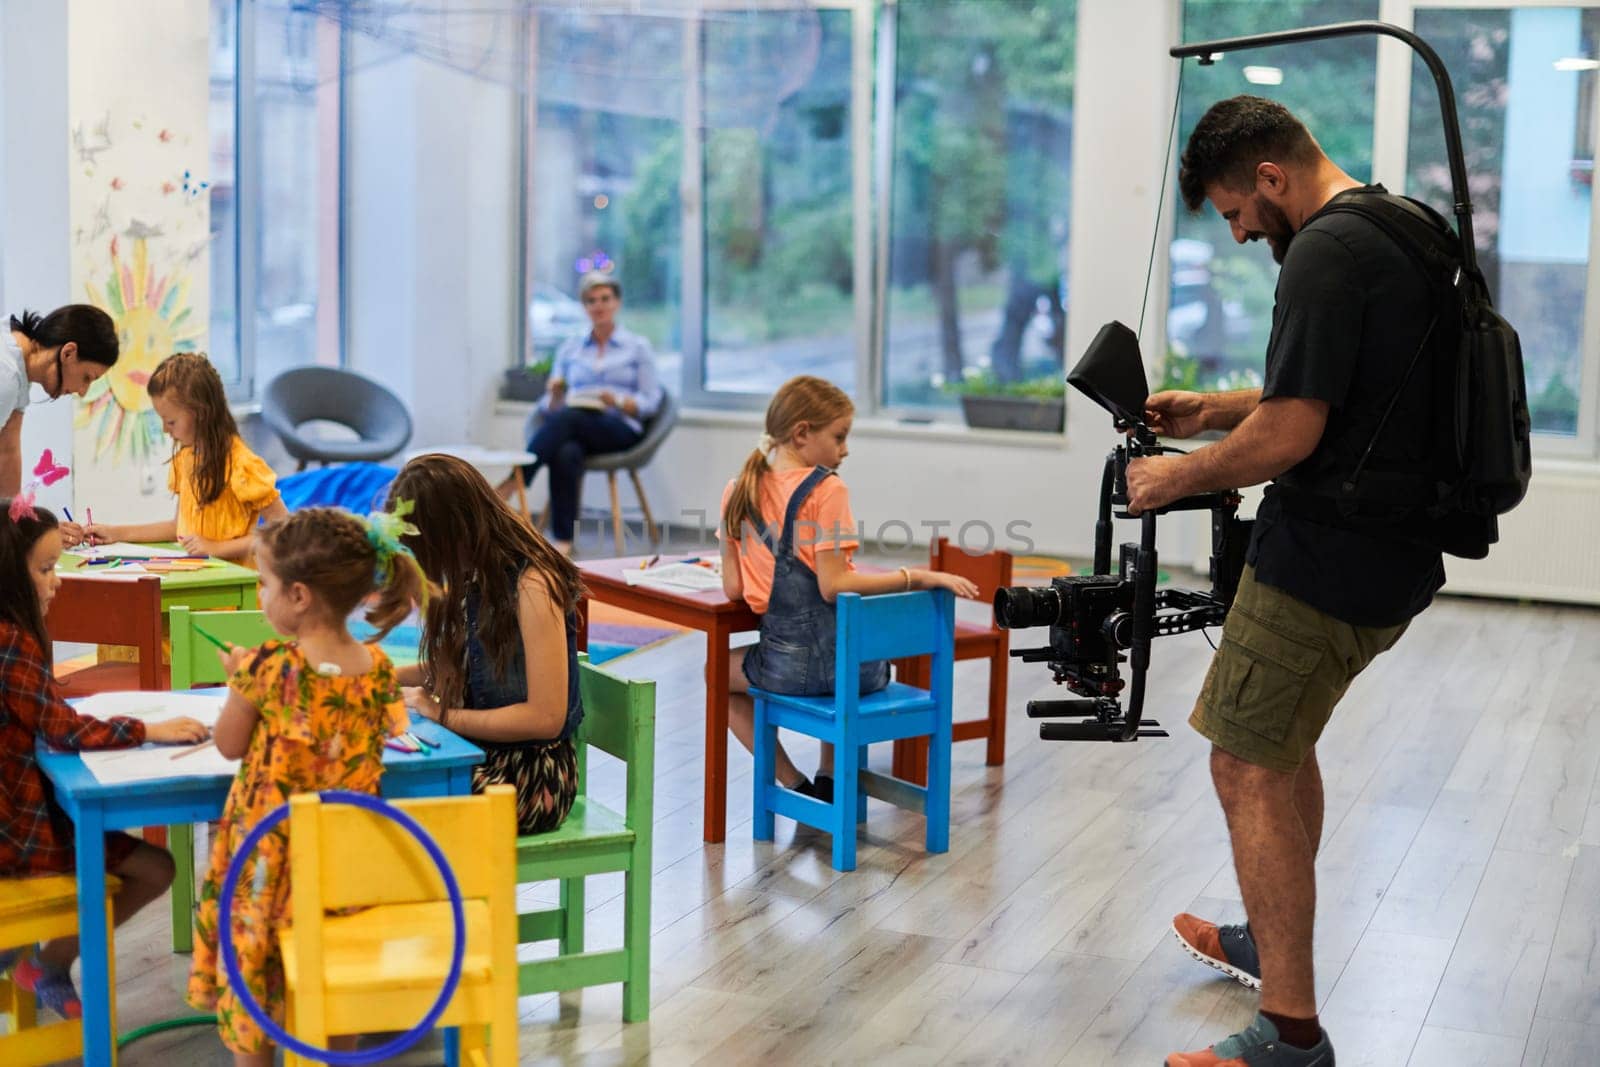 Cameraman films the joyful play and creative exploration of children at a preschool by dotshock